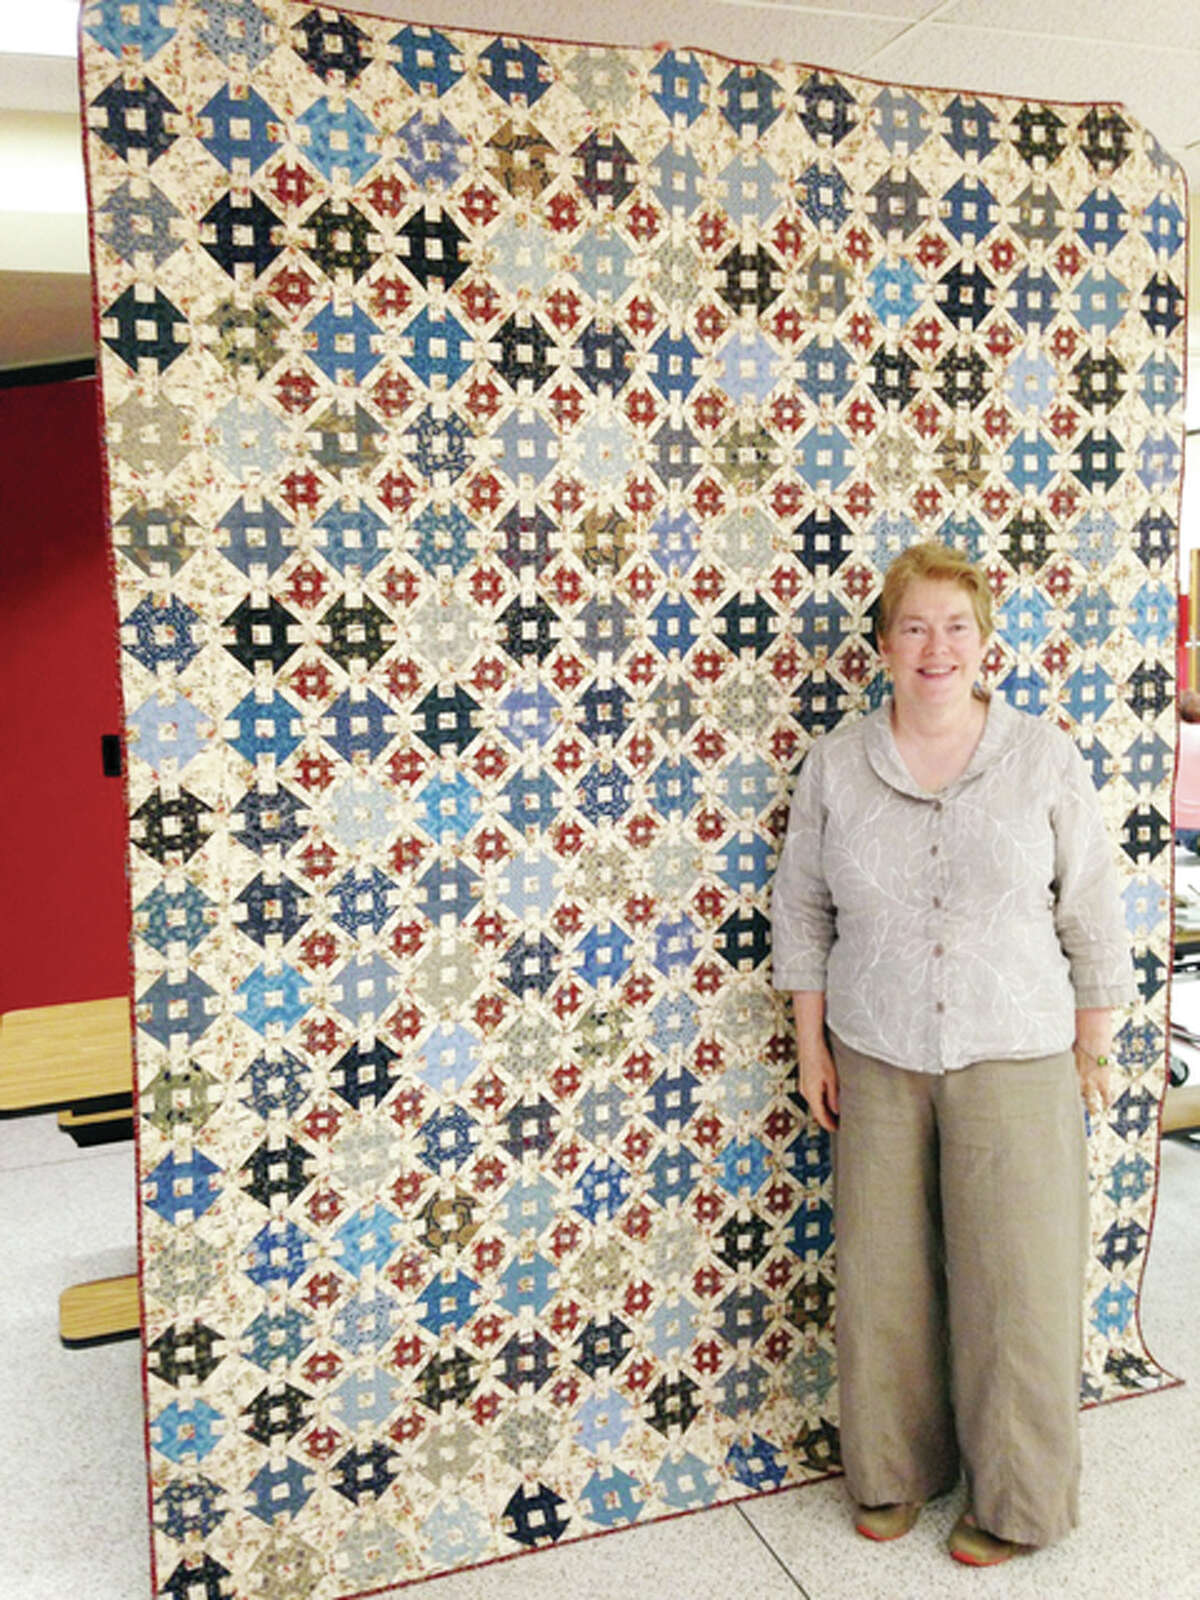 Ada Rediger’s “A Dash of Tradition” quilt won the quilt category during the 2014 River Country Quilt Show.